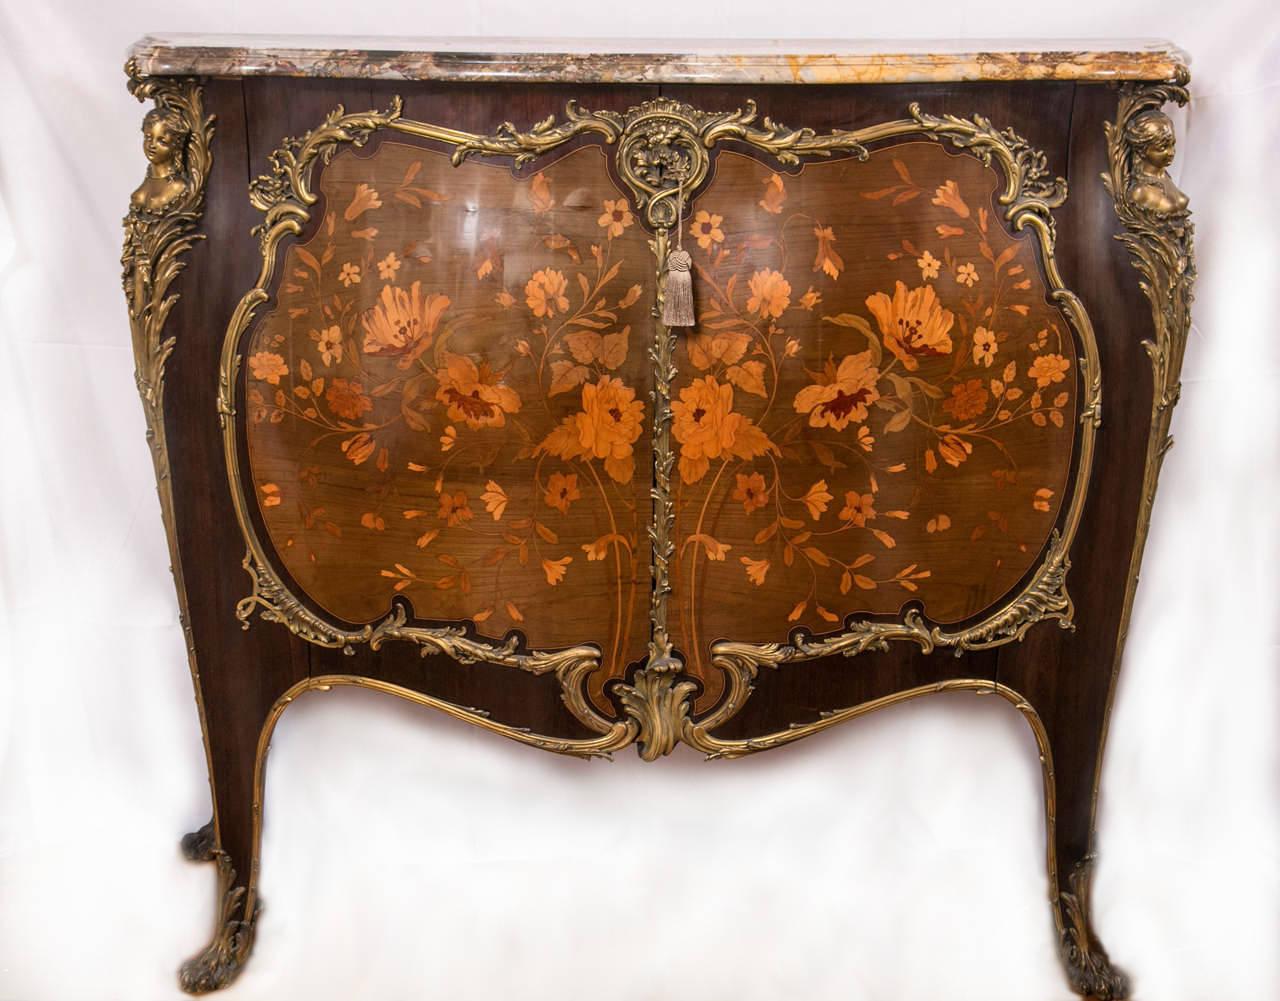 Important late 19th century Louis XV style two-door commode a Vantaux by Zwiener Jansen Successeur

An extremely fine and important bronze-mounted marquetry inlaid two-door commode or cabinet, signed, Jansen, with the bronzes stamped ZN. Standing